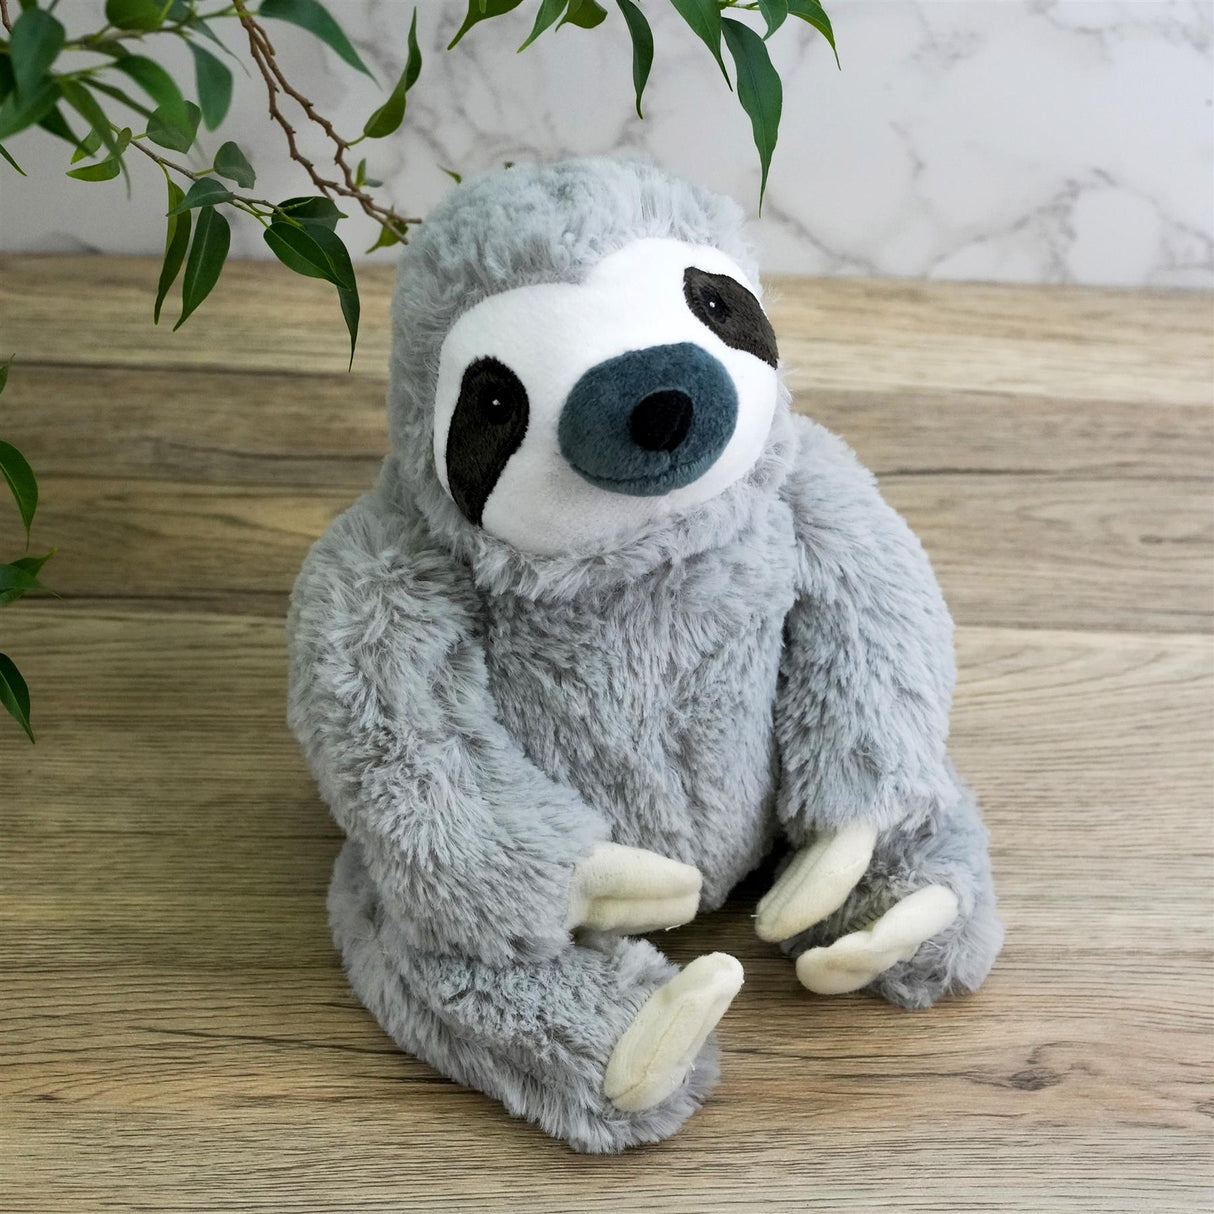 Sloth Door Novelty Stopper by The Magic Toy Shop - UKBuyZone